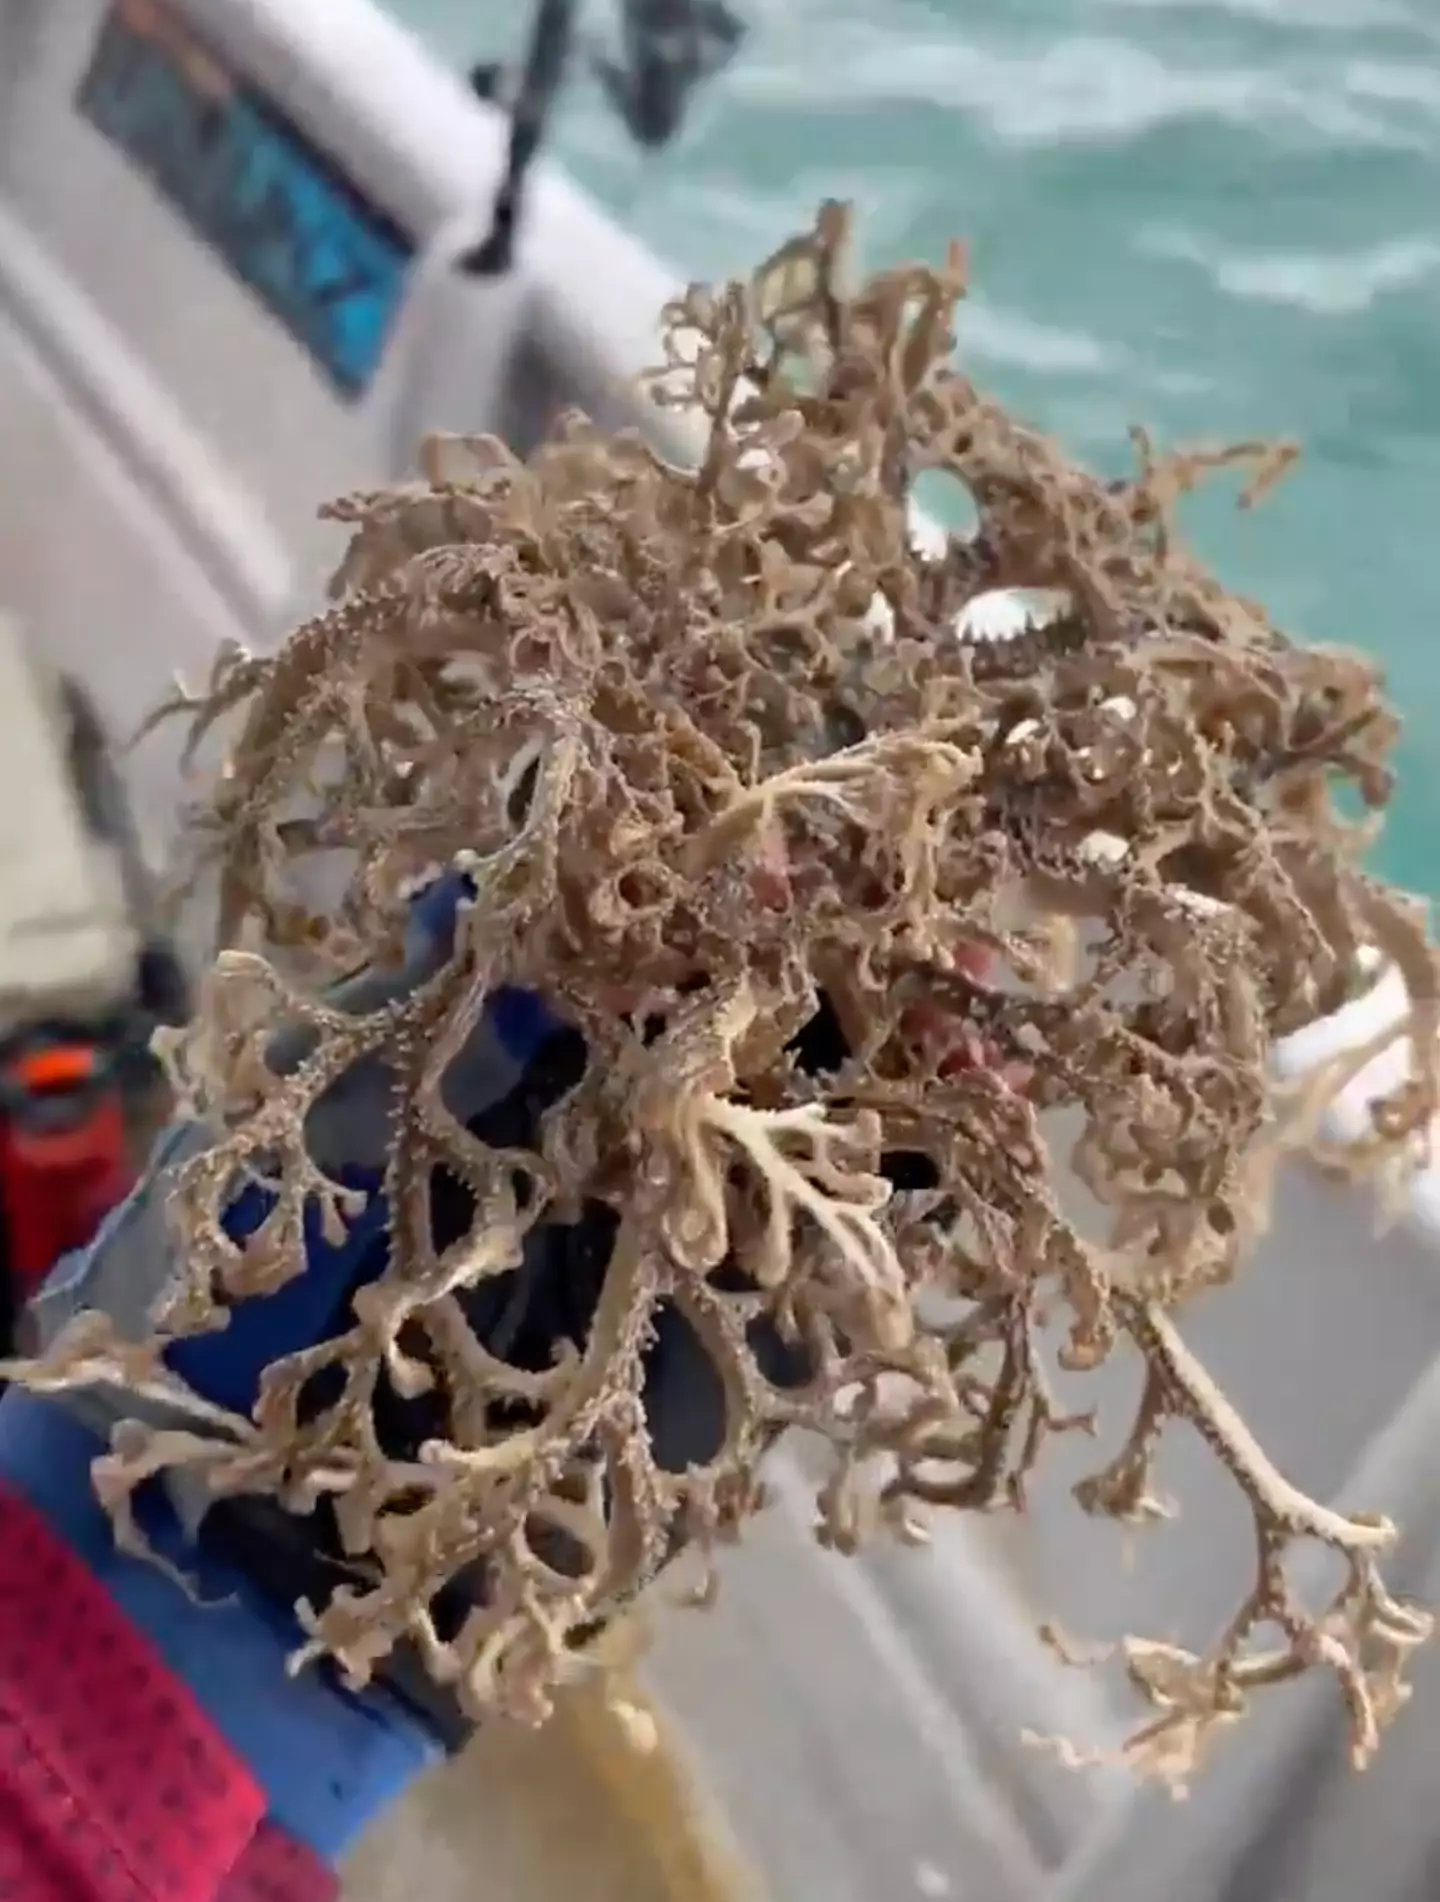 The creature is actually known as a Basket Star and is related to starfish and sea urchins.